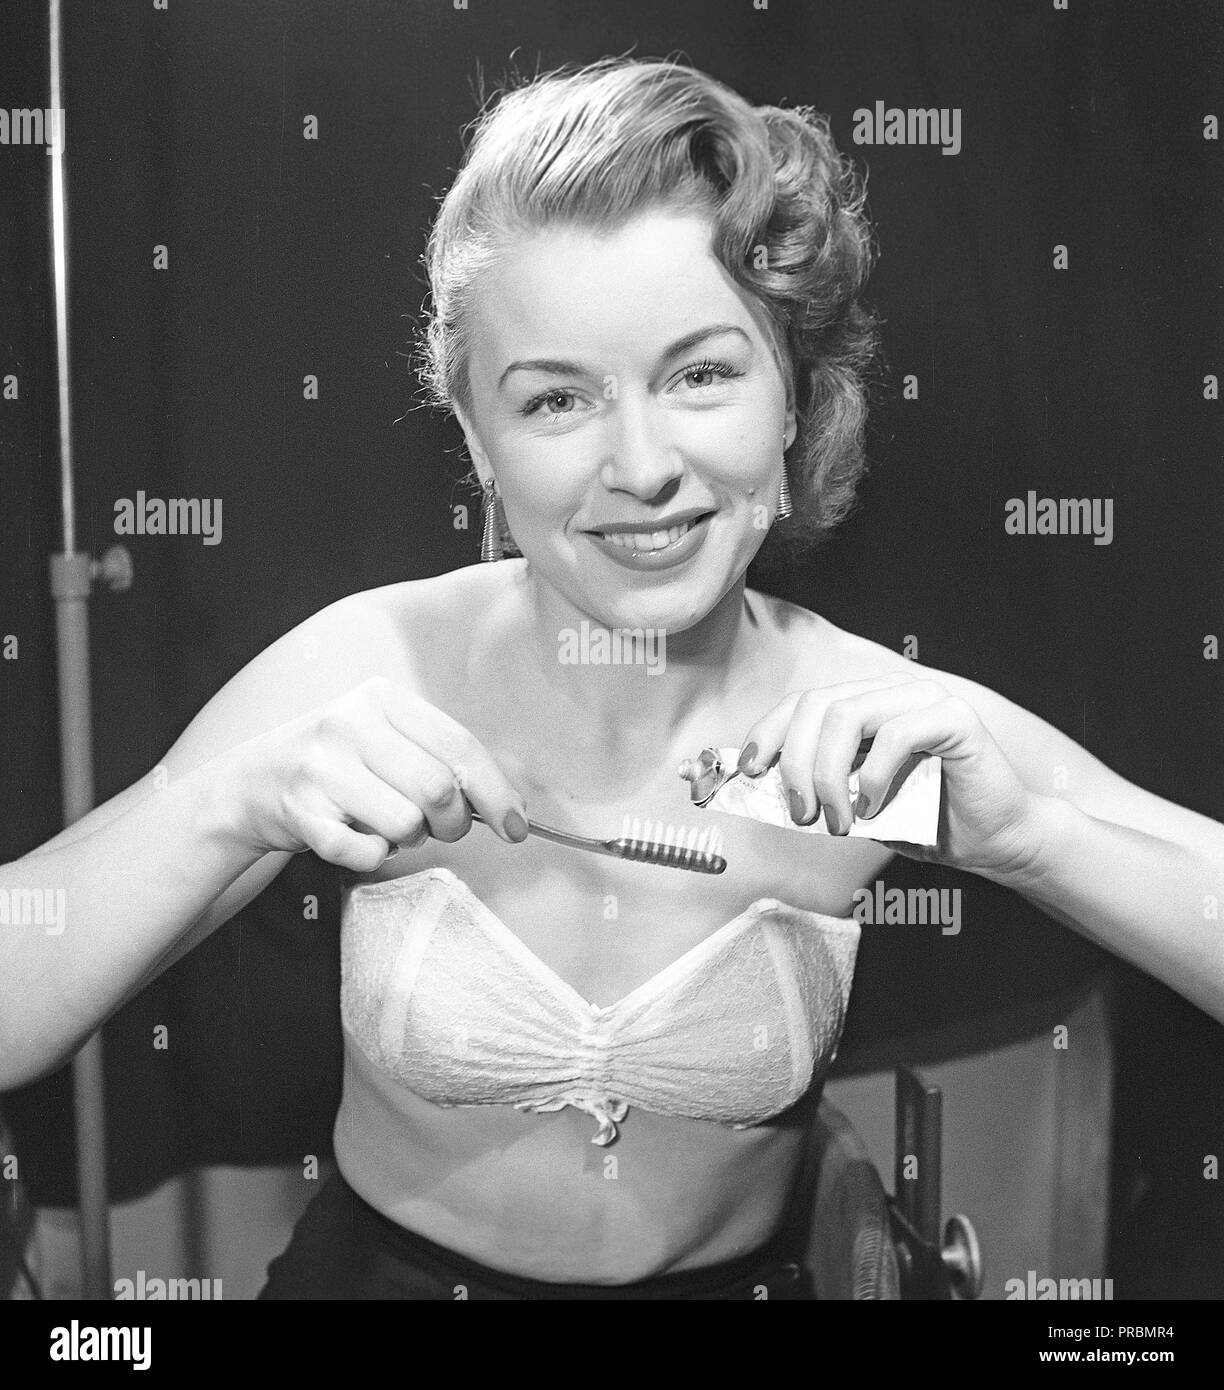 Woman of the 1950s. A woman is posing in typical 1950s underwear